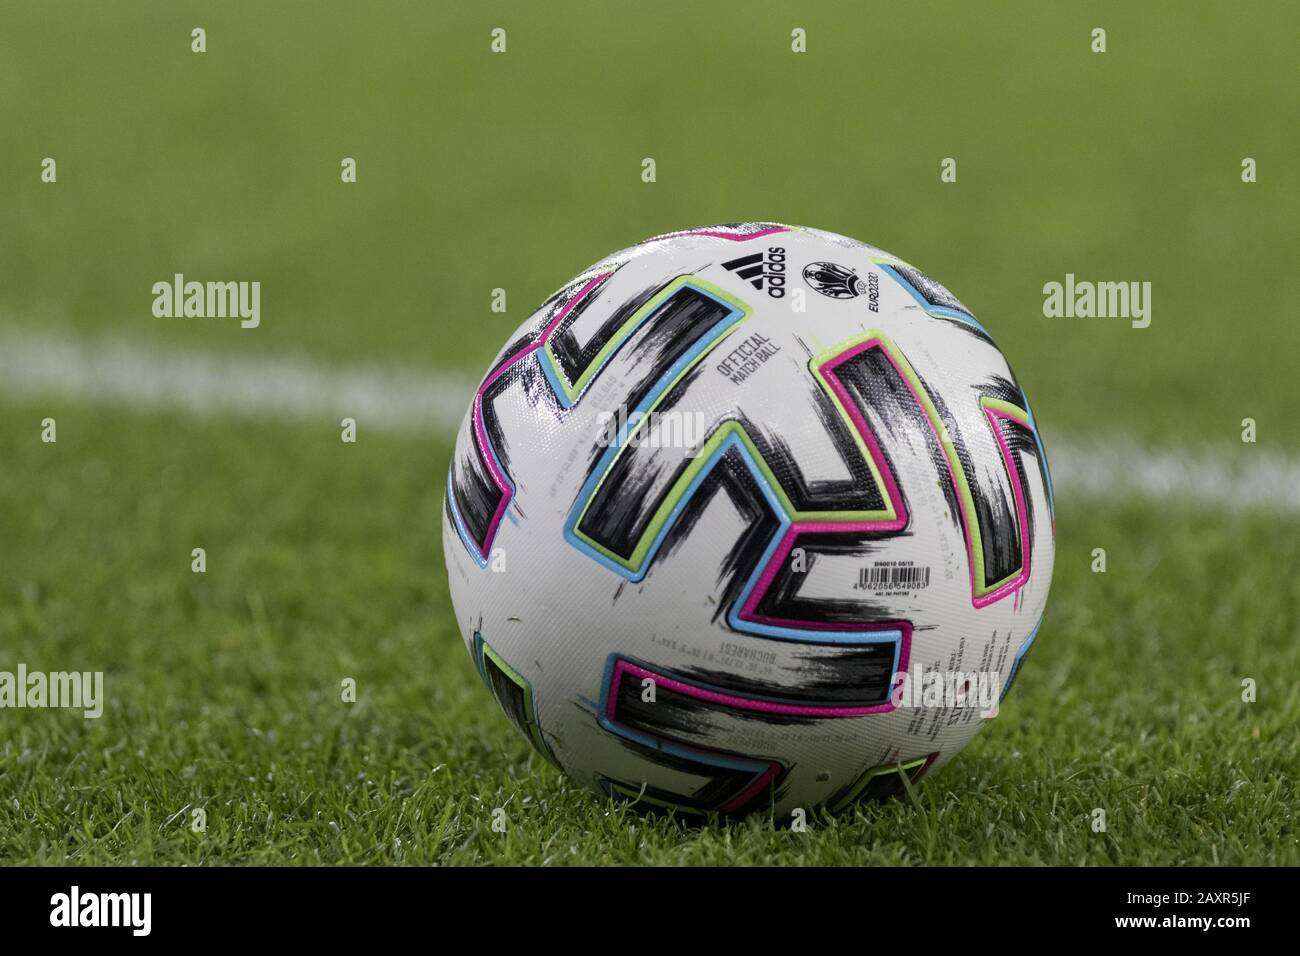 Florecer Atlas flota Bilbao, Bizkaia, SPAIN. 12th Feb, 2020. Adidas official Copa del Rey ball  during the game between Athletic Club and Granada. Athletic Club de Bilbao  hosted Granada CF in the going match of